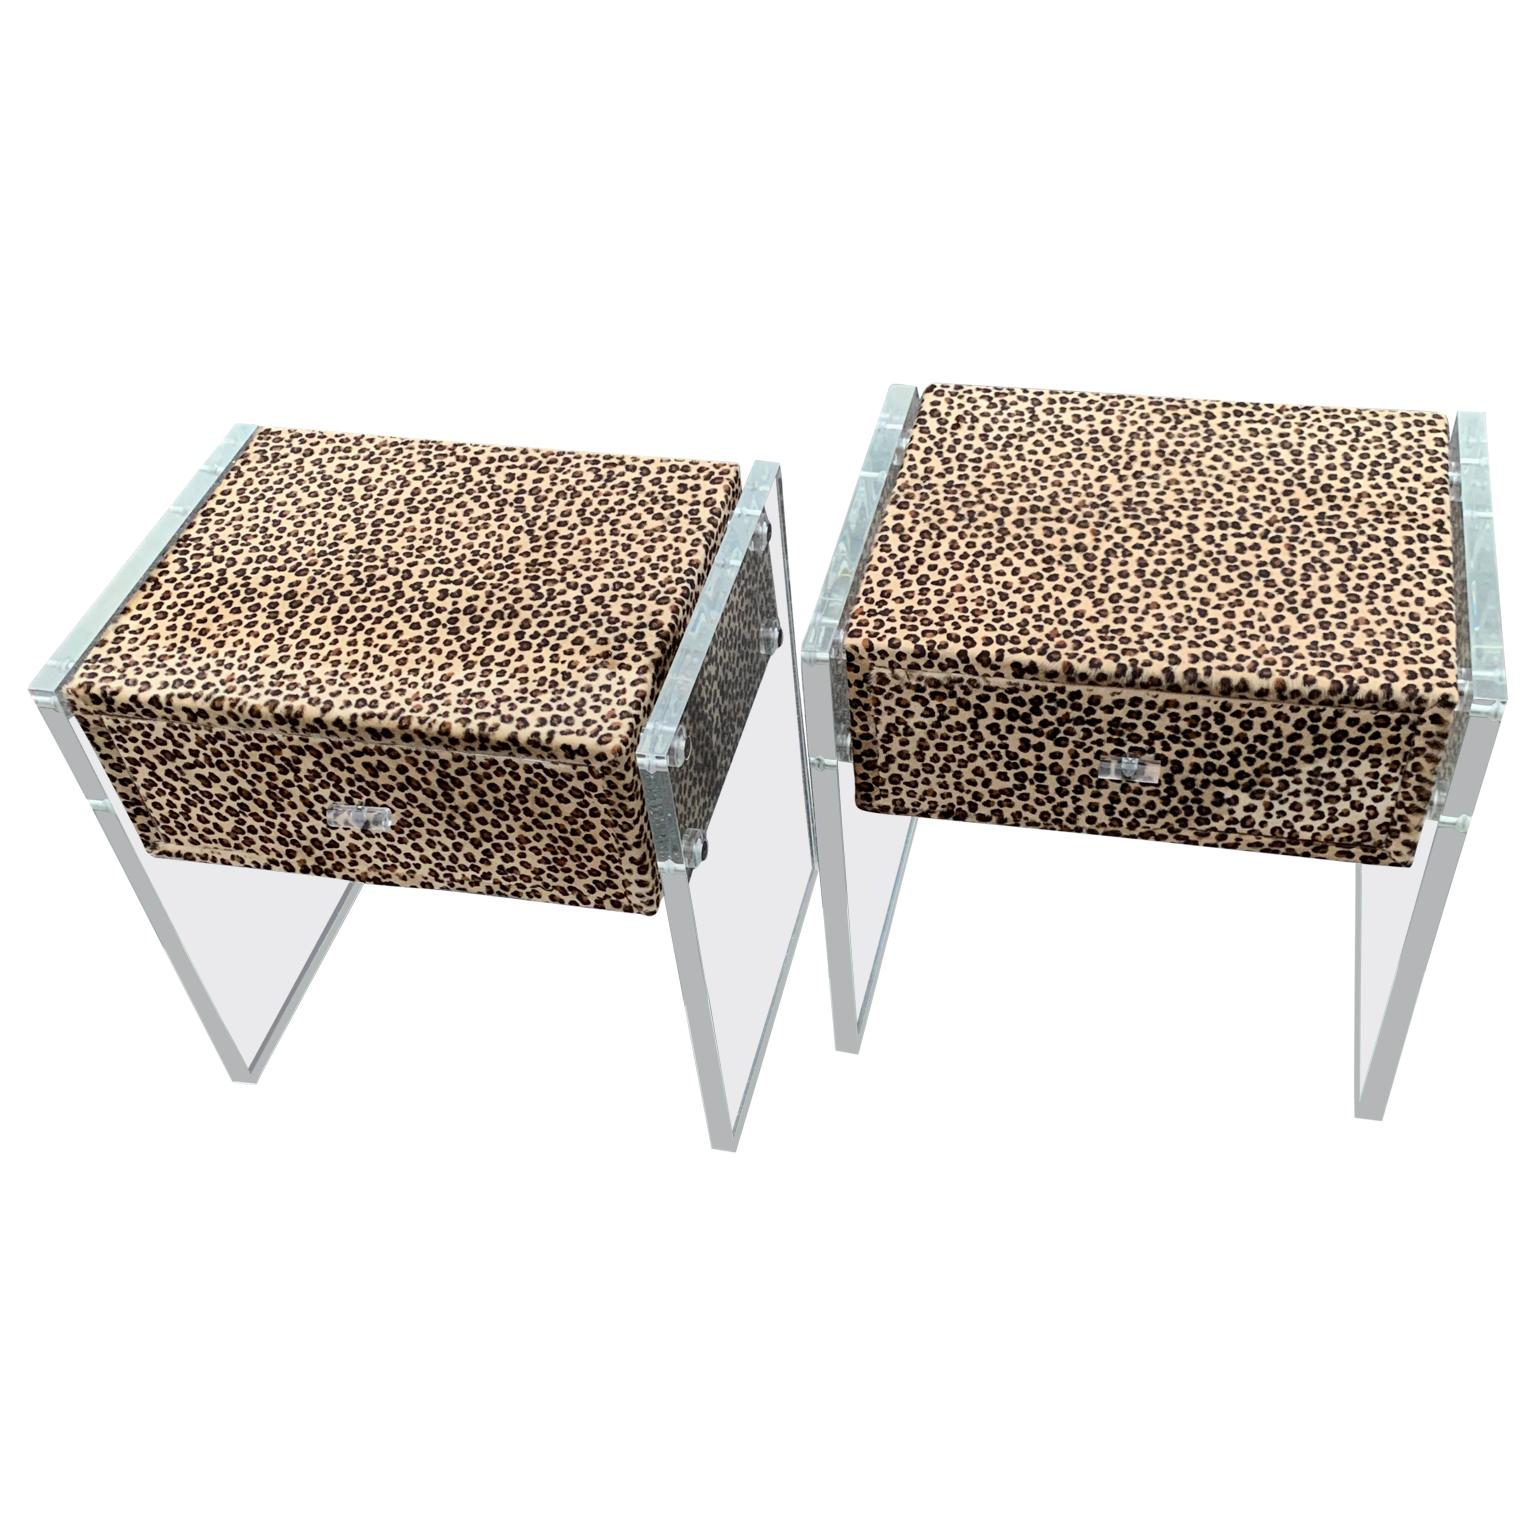 Pair of Faux Cheetah Skin Upholstered Nightstands with Lucite Side Panels (amerikanisch)